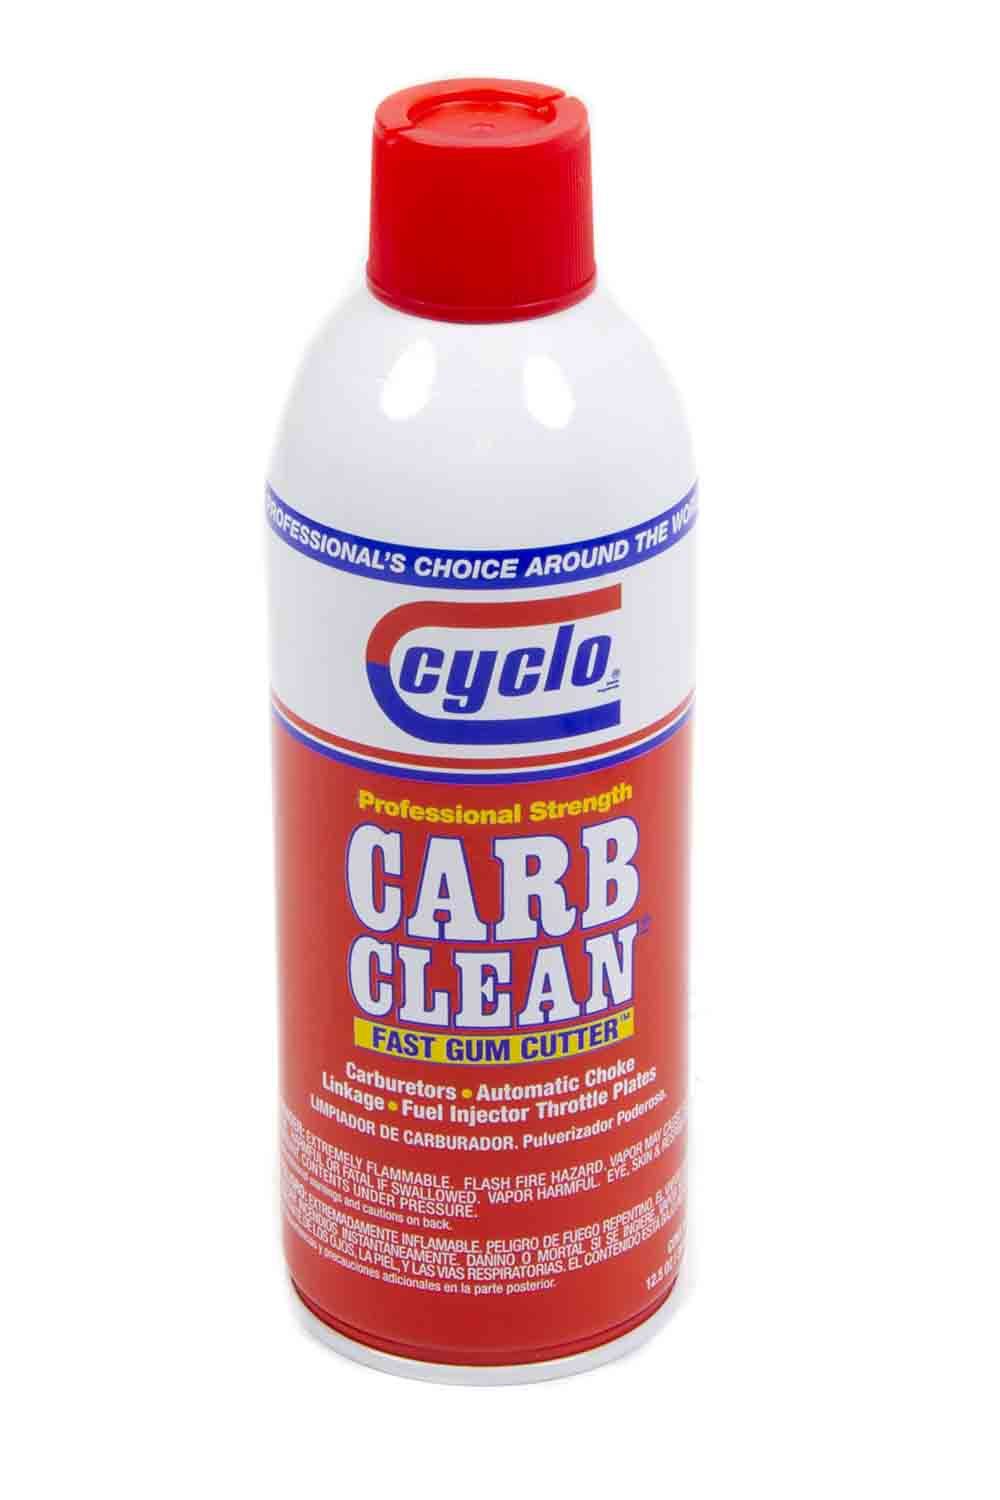 Cyclo 13 Oz. Carb Cleaner CCLC1